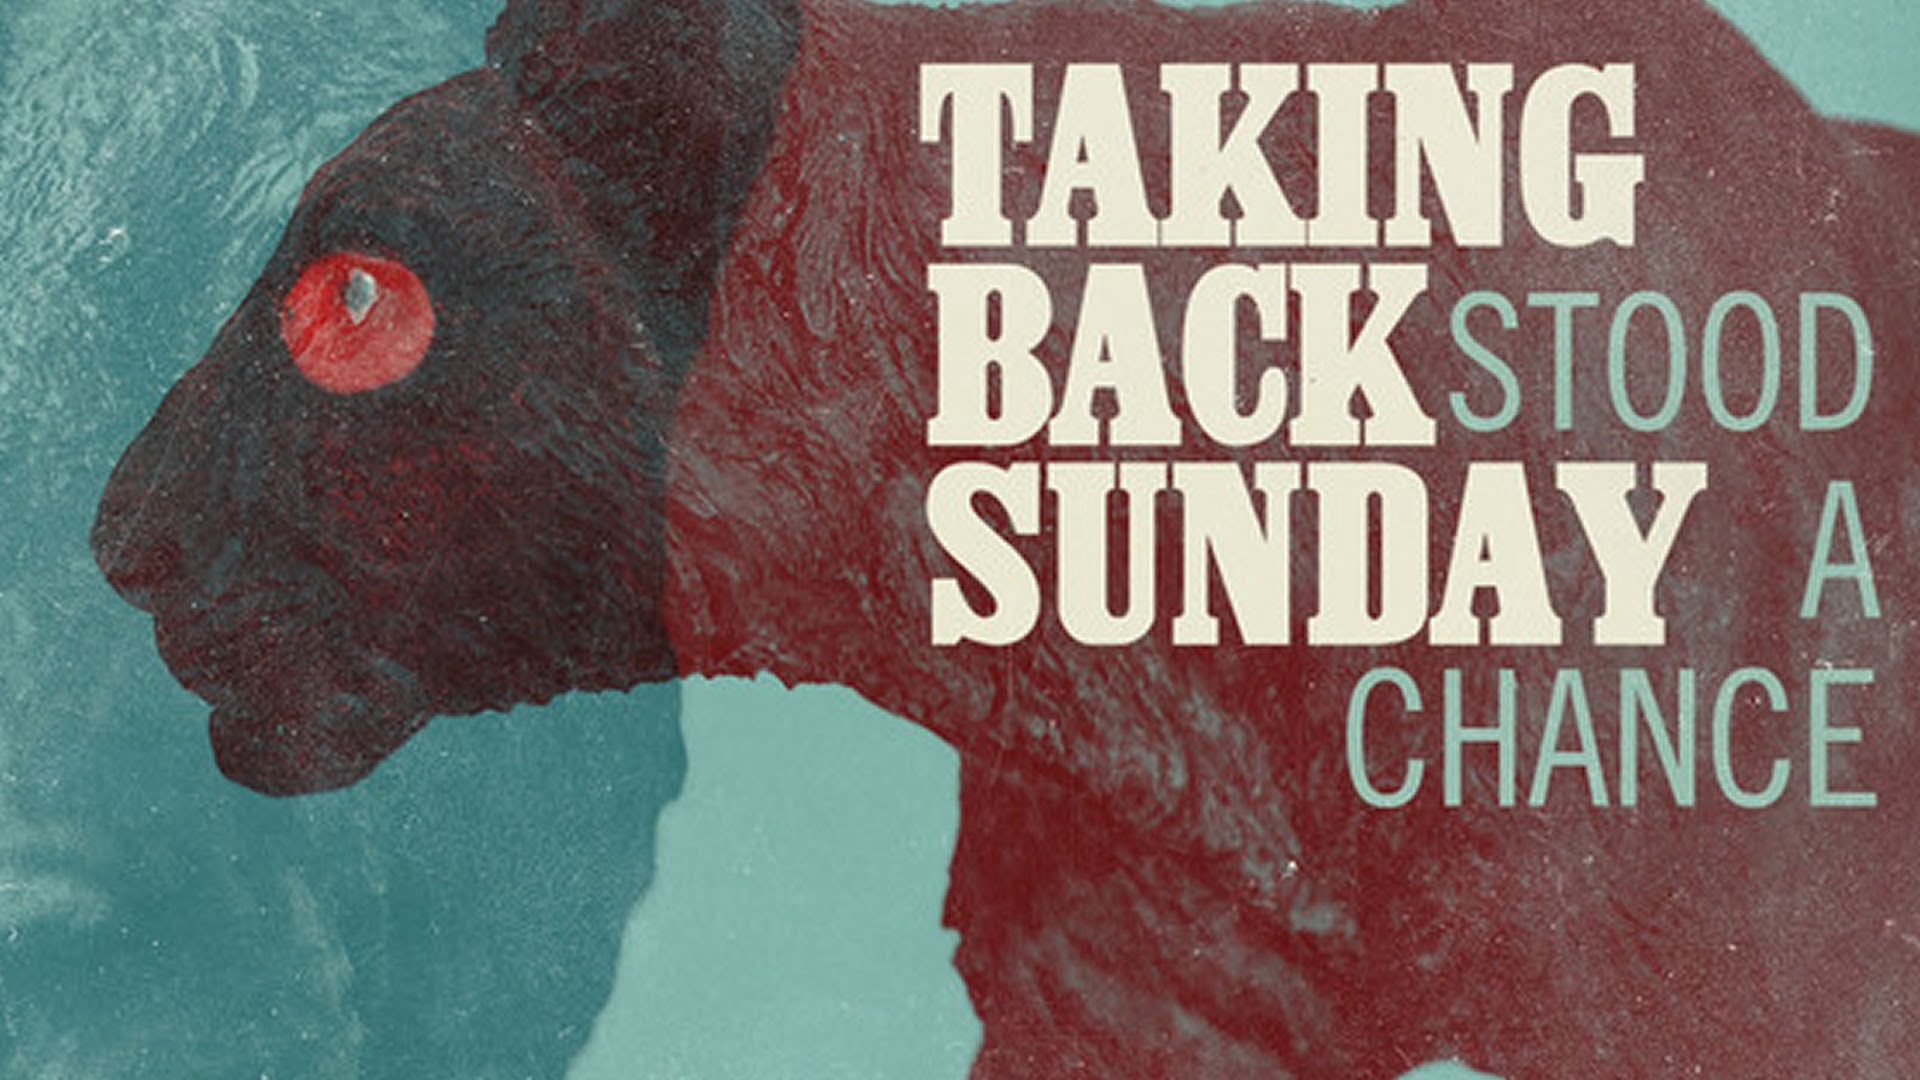 Taking Back Sunday - Stood A Chance Track / Video Review - YouTube